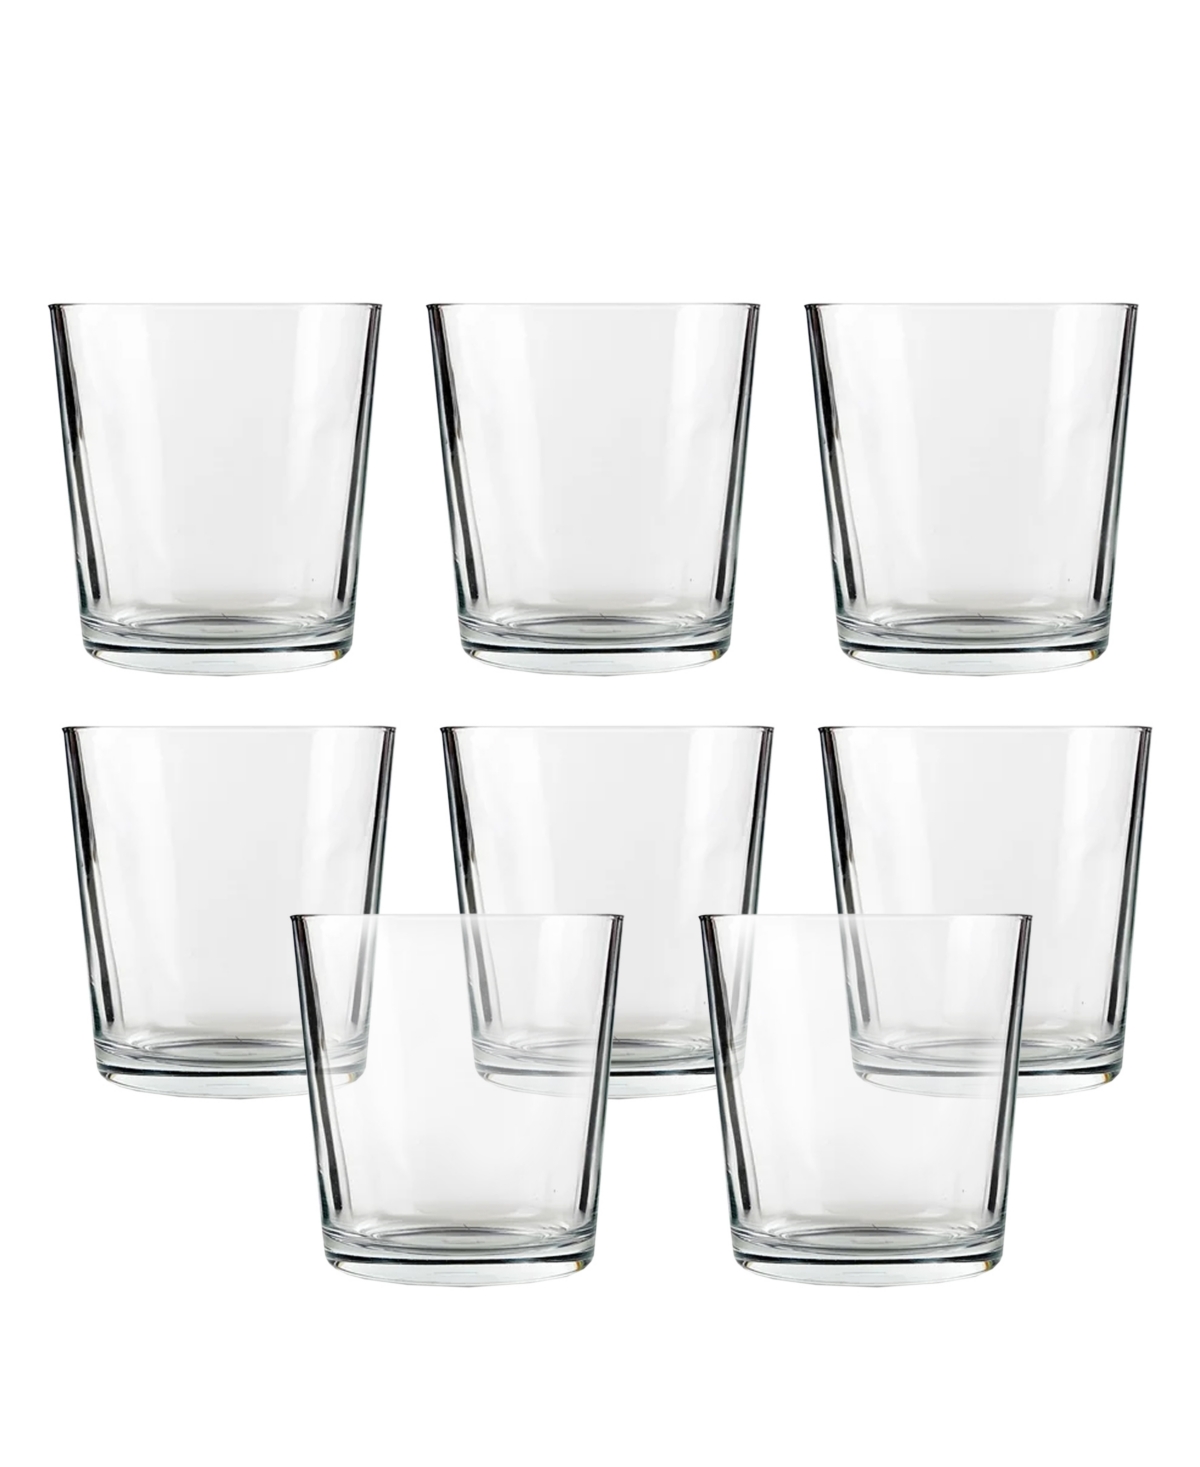 Circleware Simple Home Set Of 8 12.5 oz In Clear